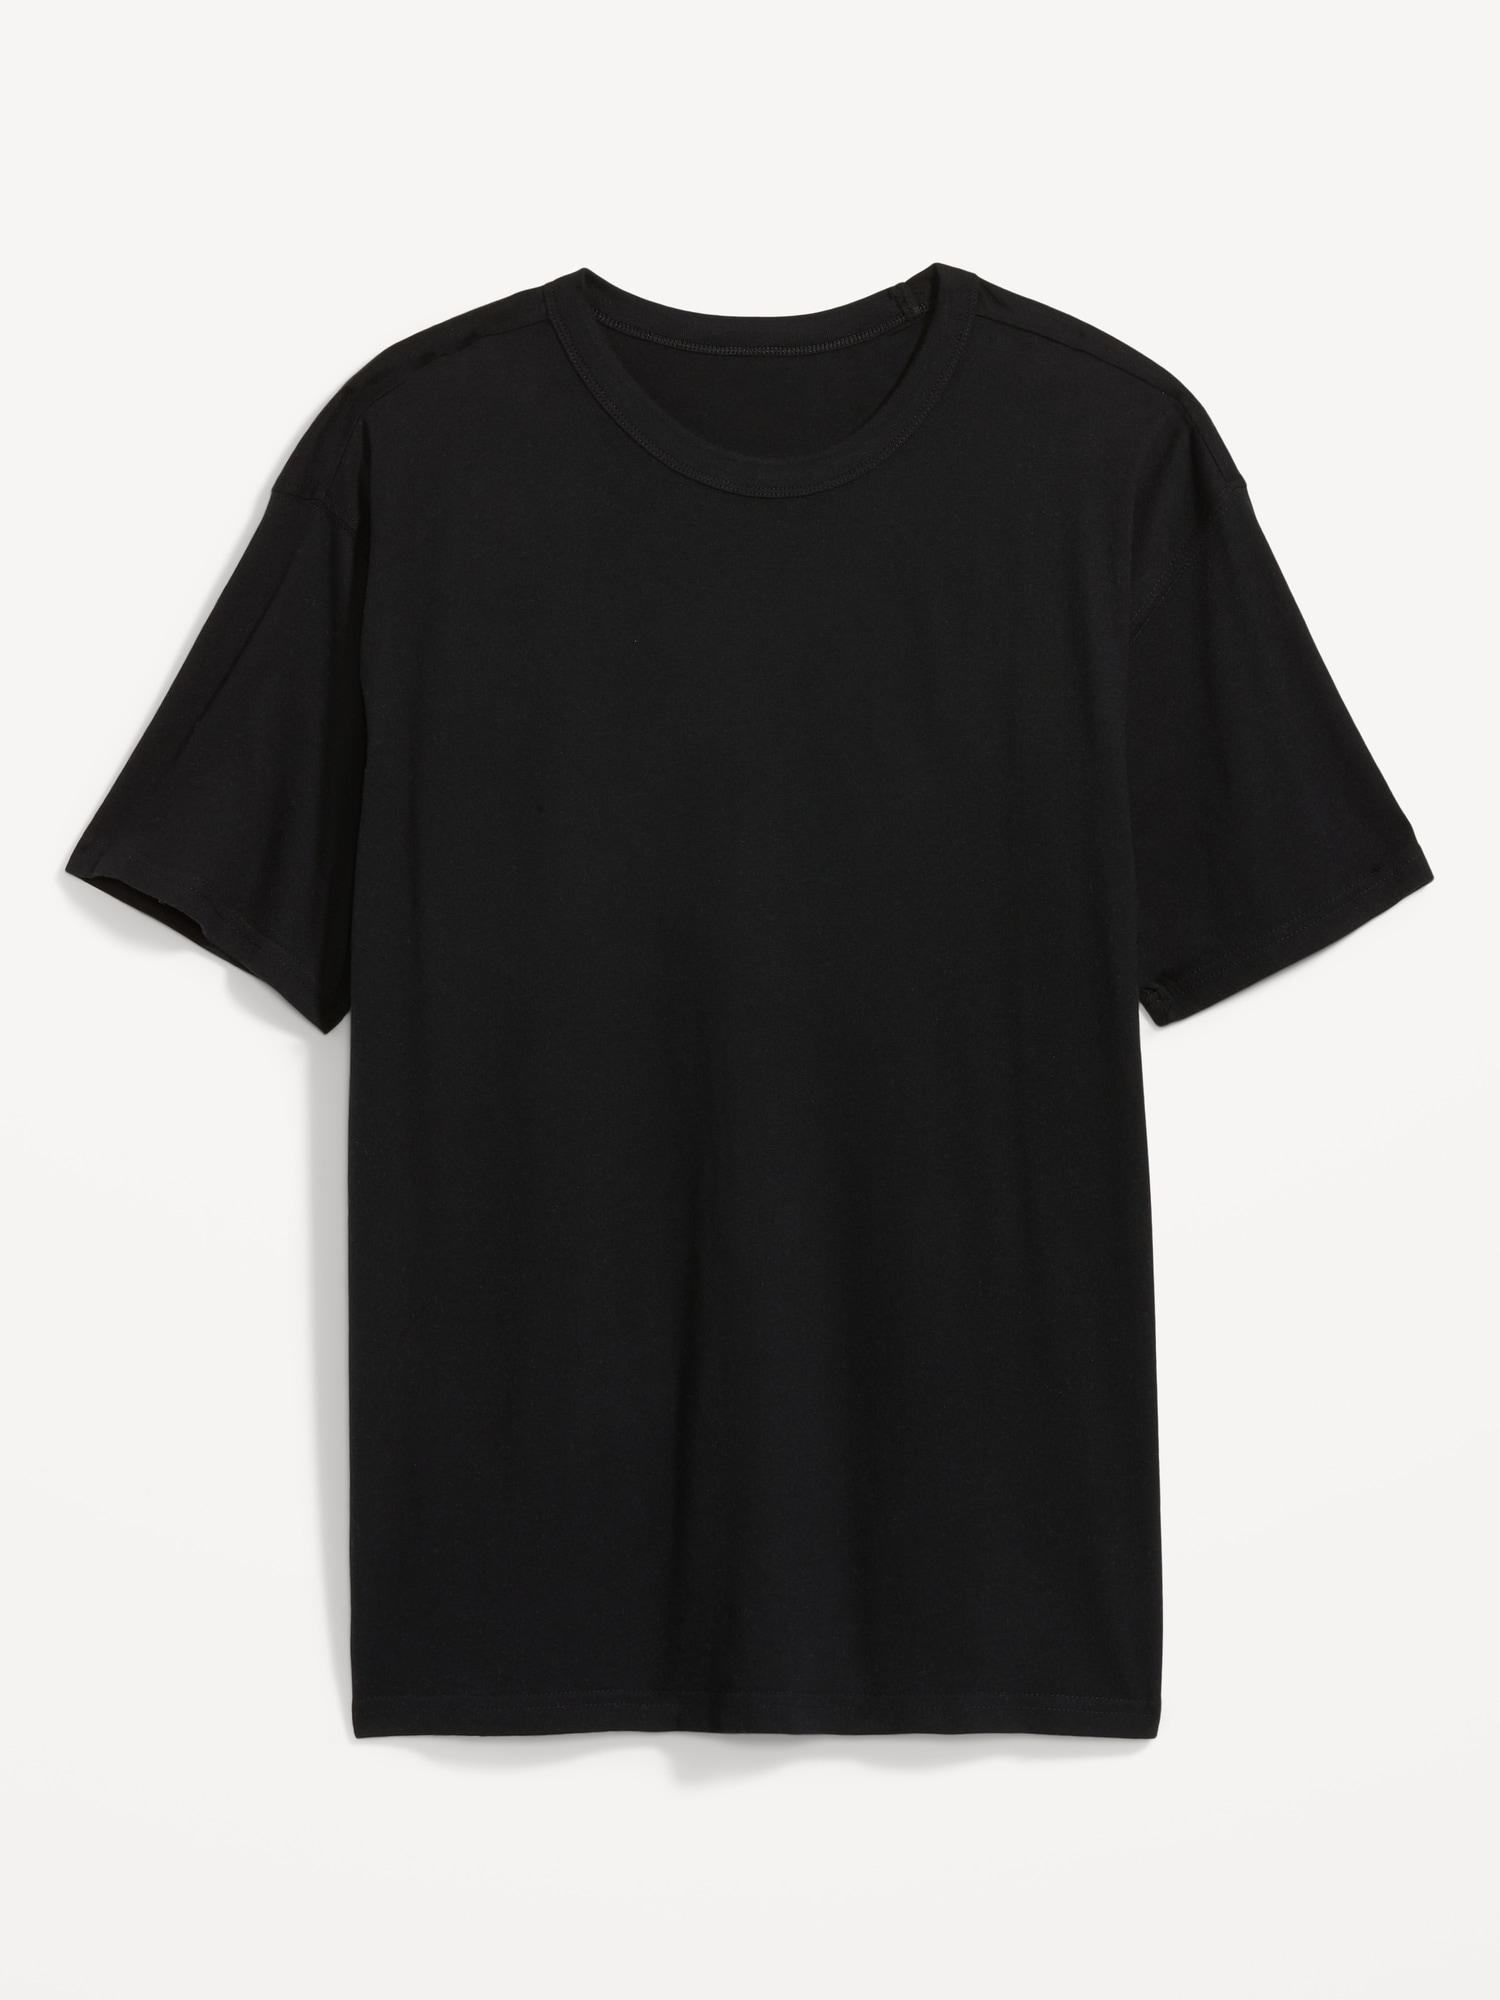 Loose-Fit Crew-Neck T-Shirt | Old Navy